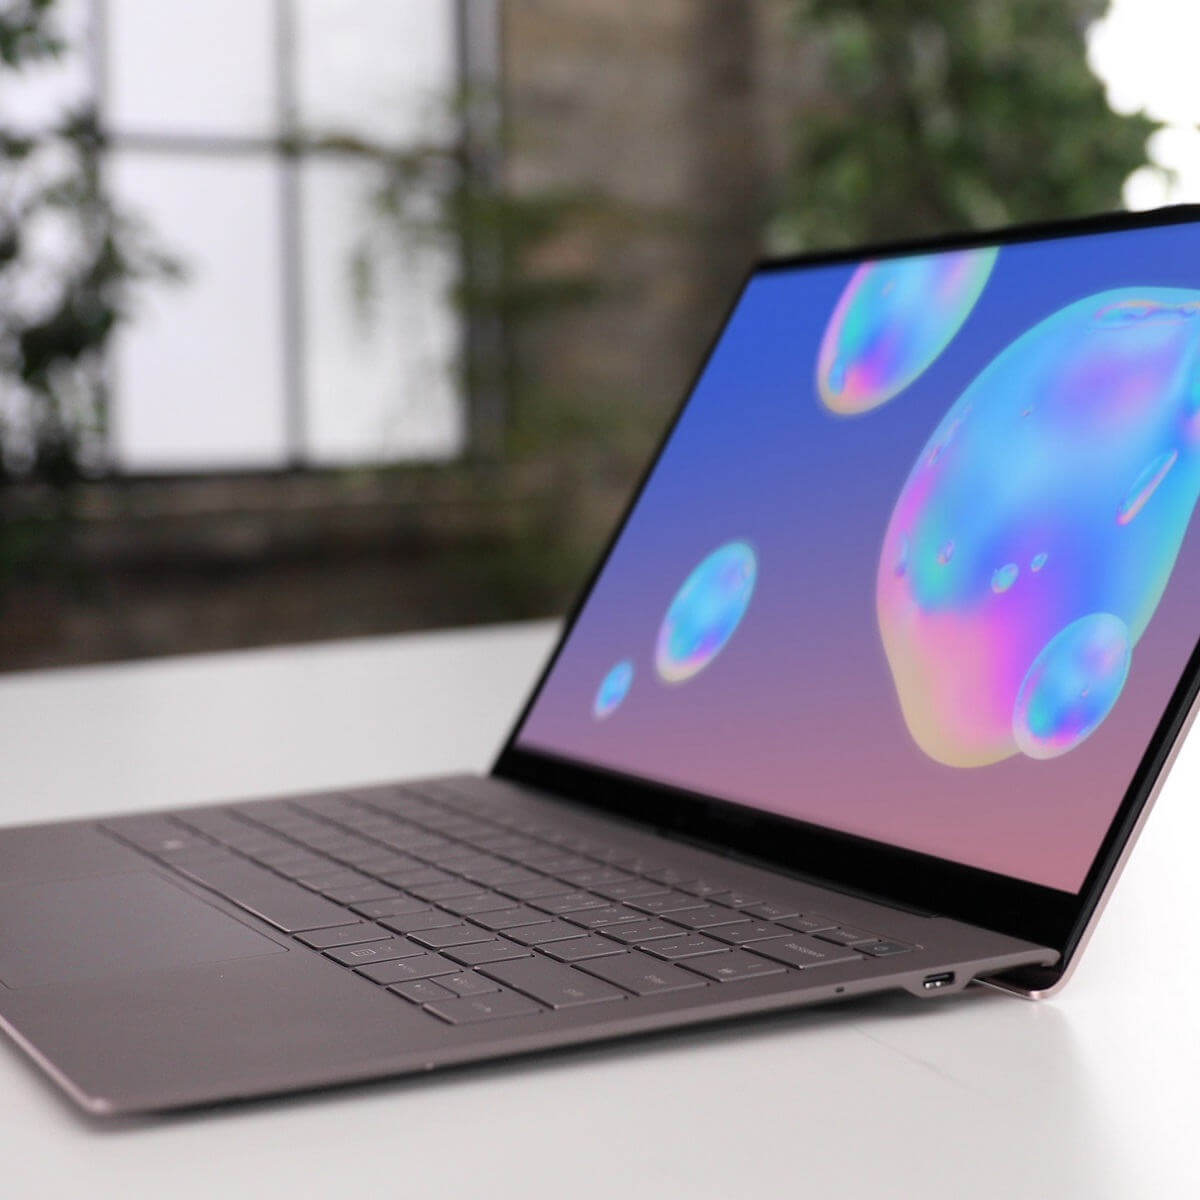 Galaxy Book S is a Windows 10 productivity champ